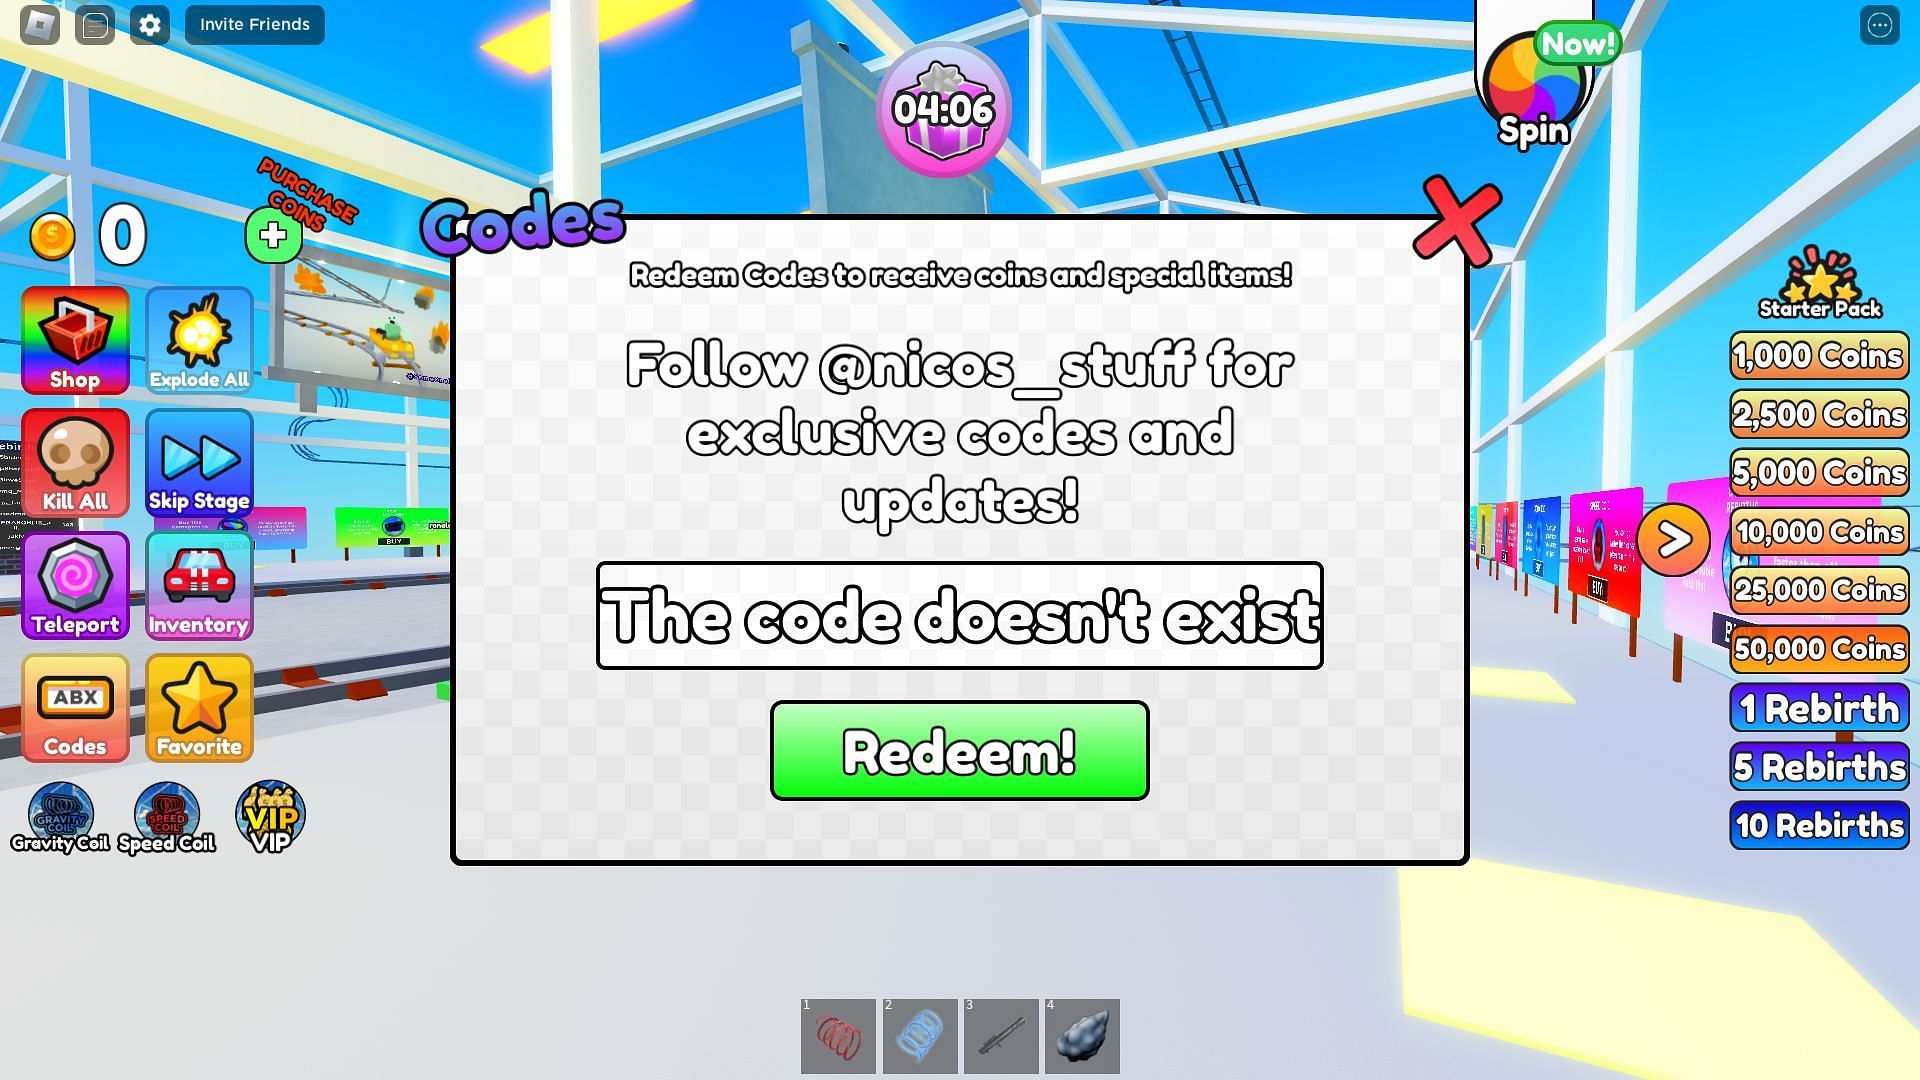 Troubleshooting codes for Cart Ride Simulator (Image via Roblox)